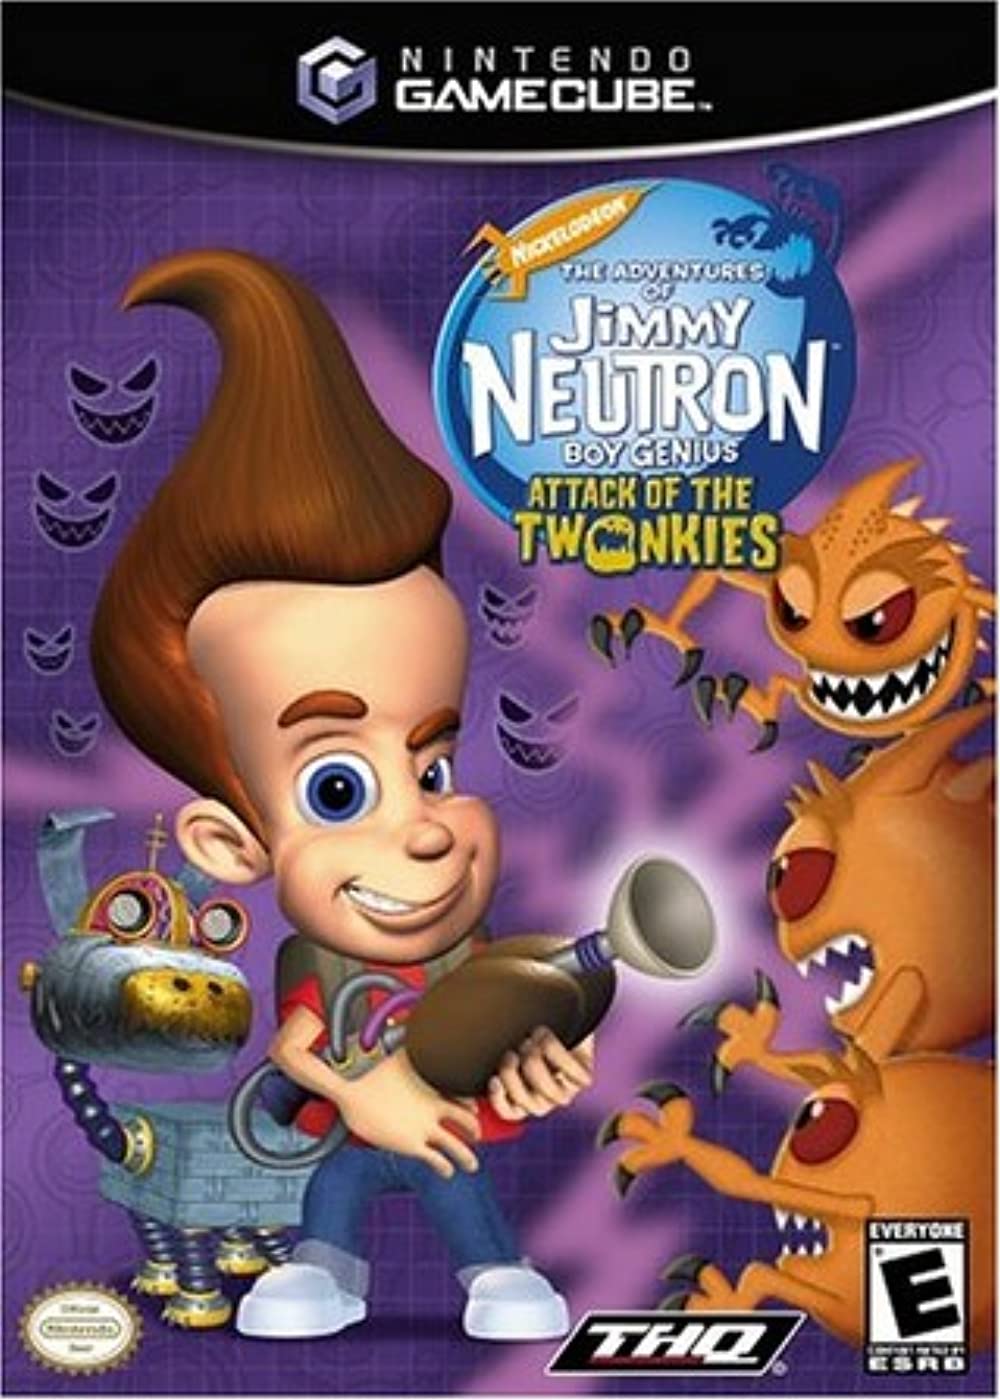 The Adventures of Jimmy Neutron Boy Genius: Attack of the Twonkies (2004)